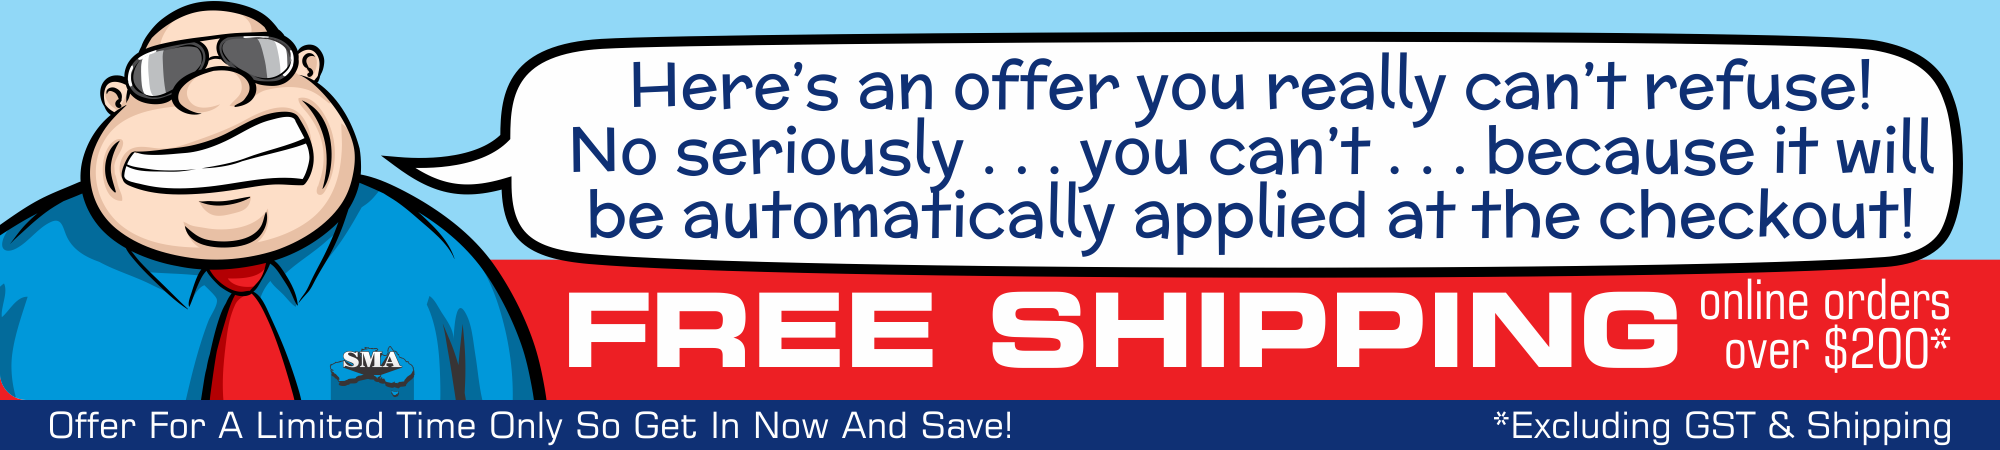 Ad Banner 1 Free Shipping